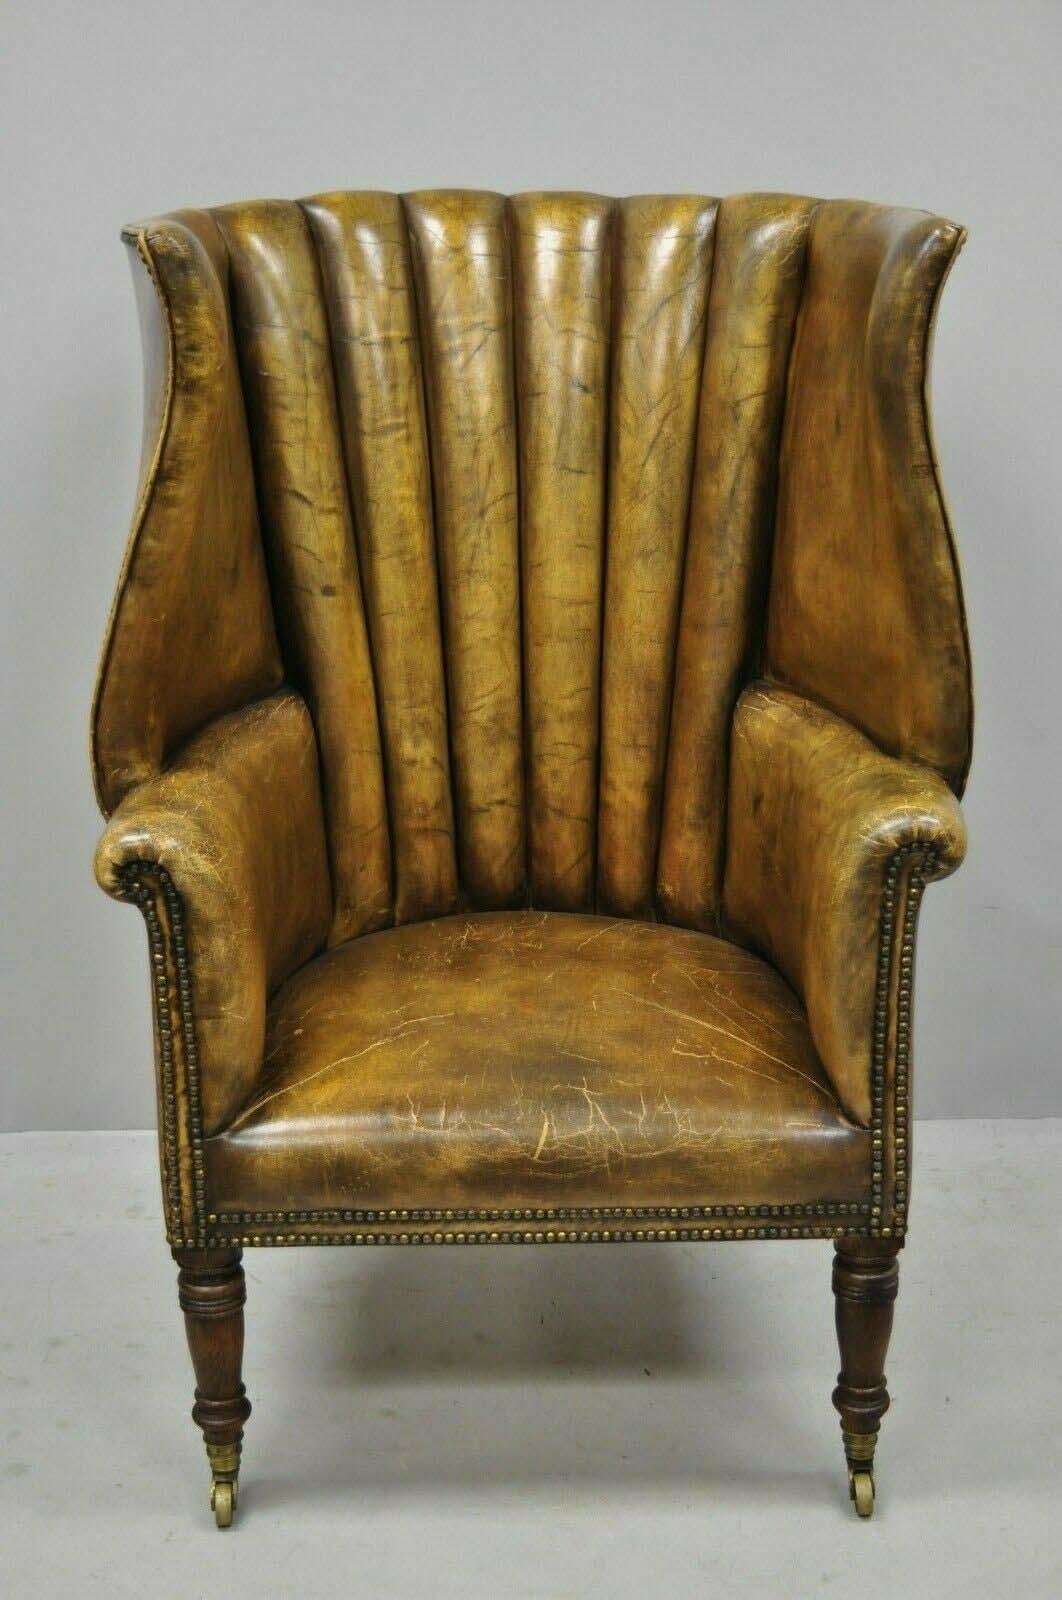 Antique 19th century Howard & Sons Ltd English brown leather channel back wingback library chair. Item features tall oversized wingback, nailhead trim, oakwood legs, brass rolling casters, beautiful original aged brown leather upholstery, solid wood